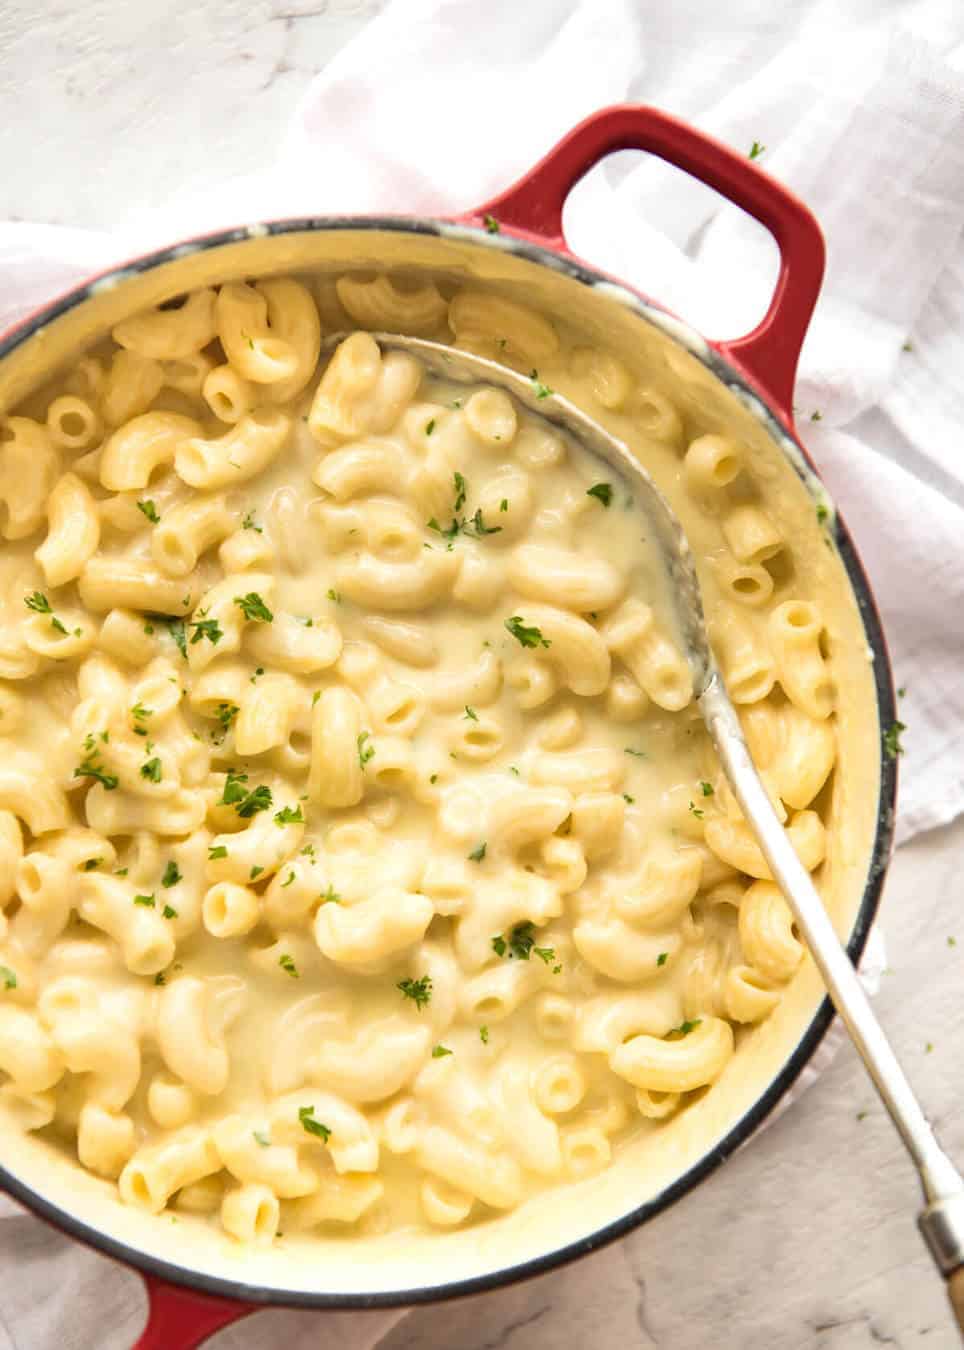 This Stovetop Macaroni and Cheese is all made in one pot! The sauce is incredibly silky, cheesy and the pasta is cooked to perfection. On the table in 20 minutes! recipetineats.com